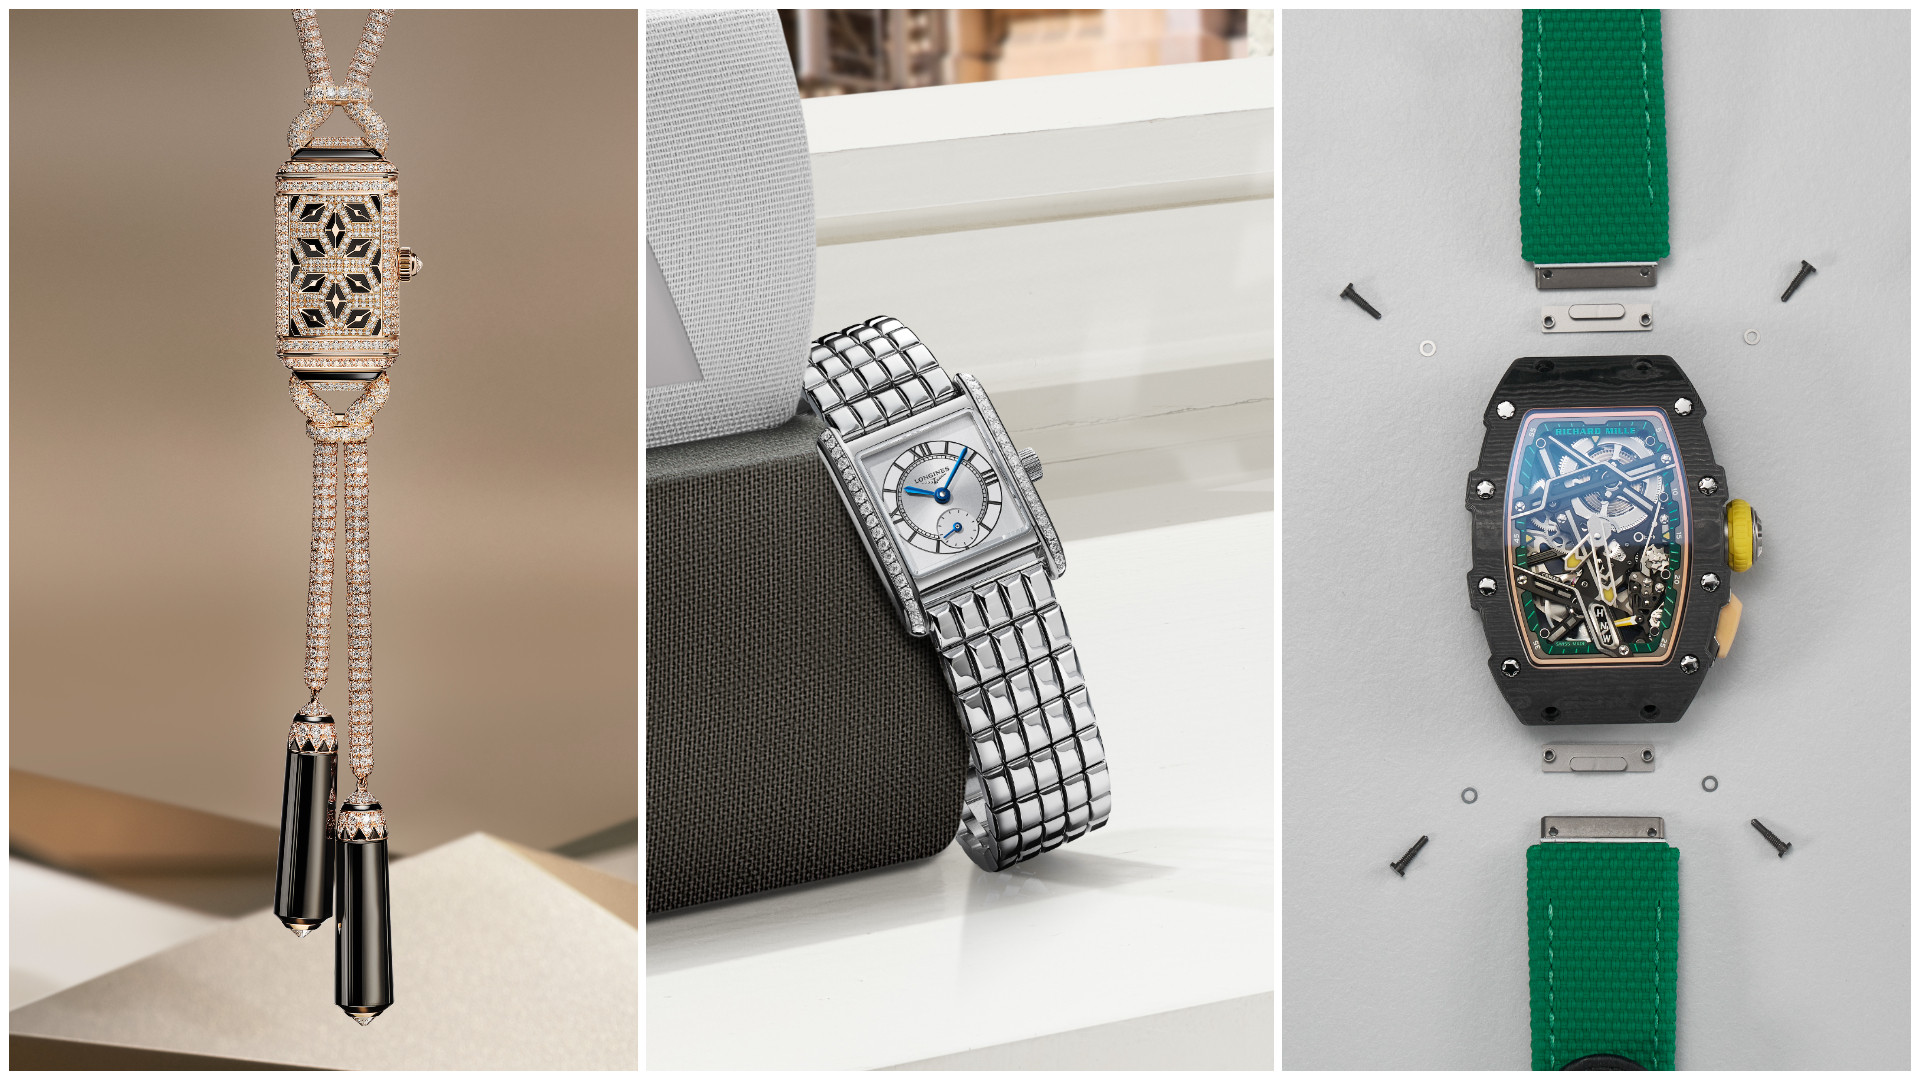 From left to right: Jaeger-LeCoultre Reverso Secret Necklace; Longines Mini Dolce Vita; Richard Mille RM 07-04.The year has seen a deluge of options in timepieces traditionally geared towards women and watches as a whole becoming more unisex adds still more choice. Photos: Handout